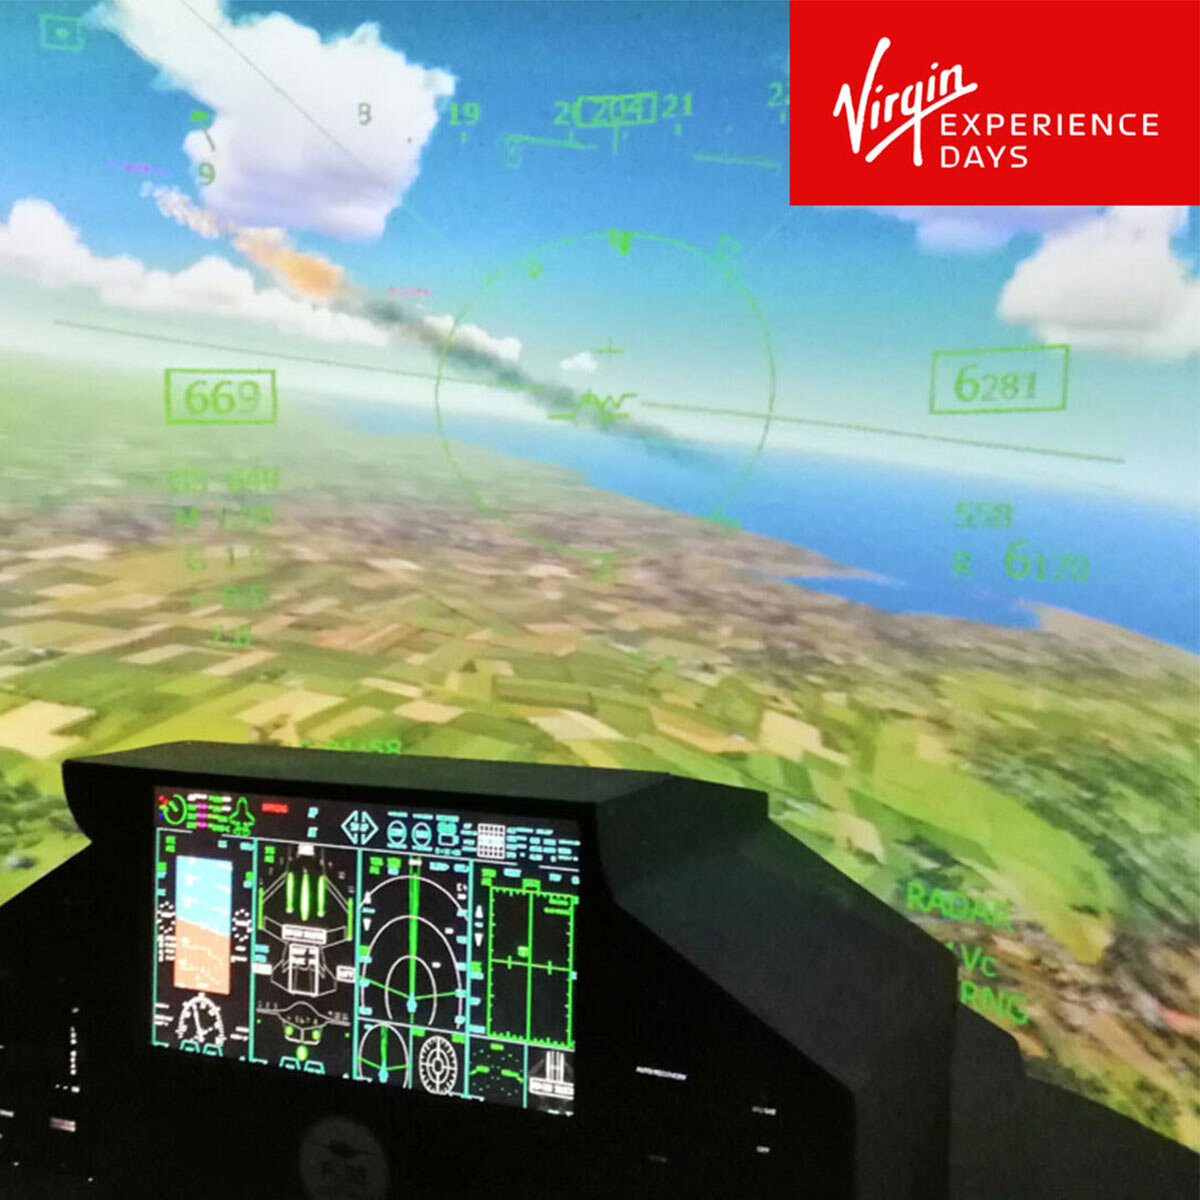 Virgin Experience Days F-35 Fighter Jet Flight Simulator For One Person (6 Years +)